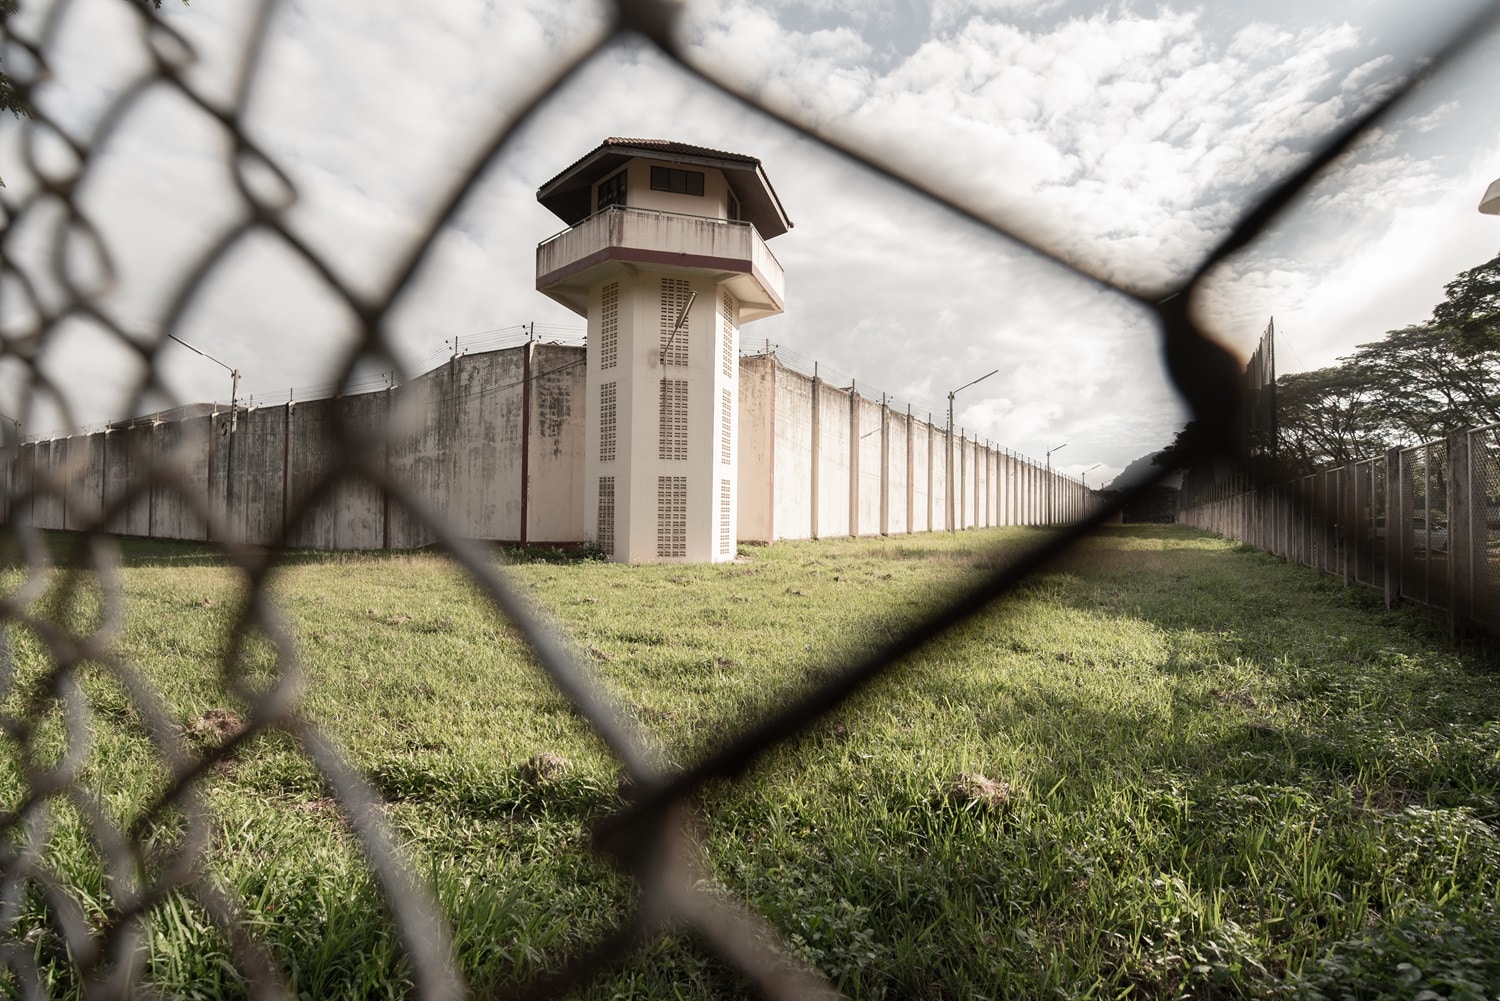 A prison photographed from behind its wire fence.